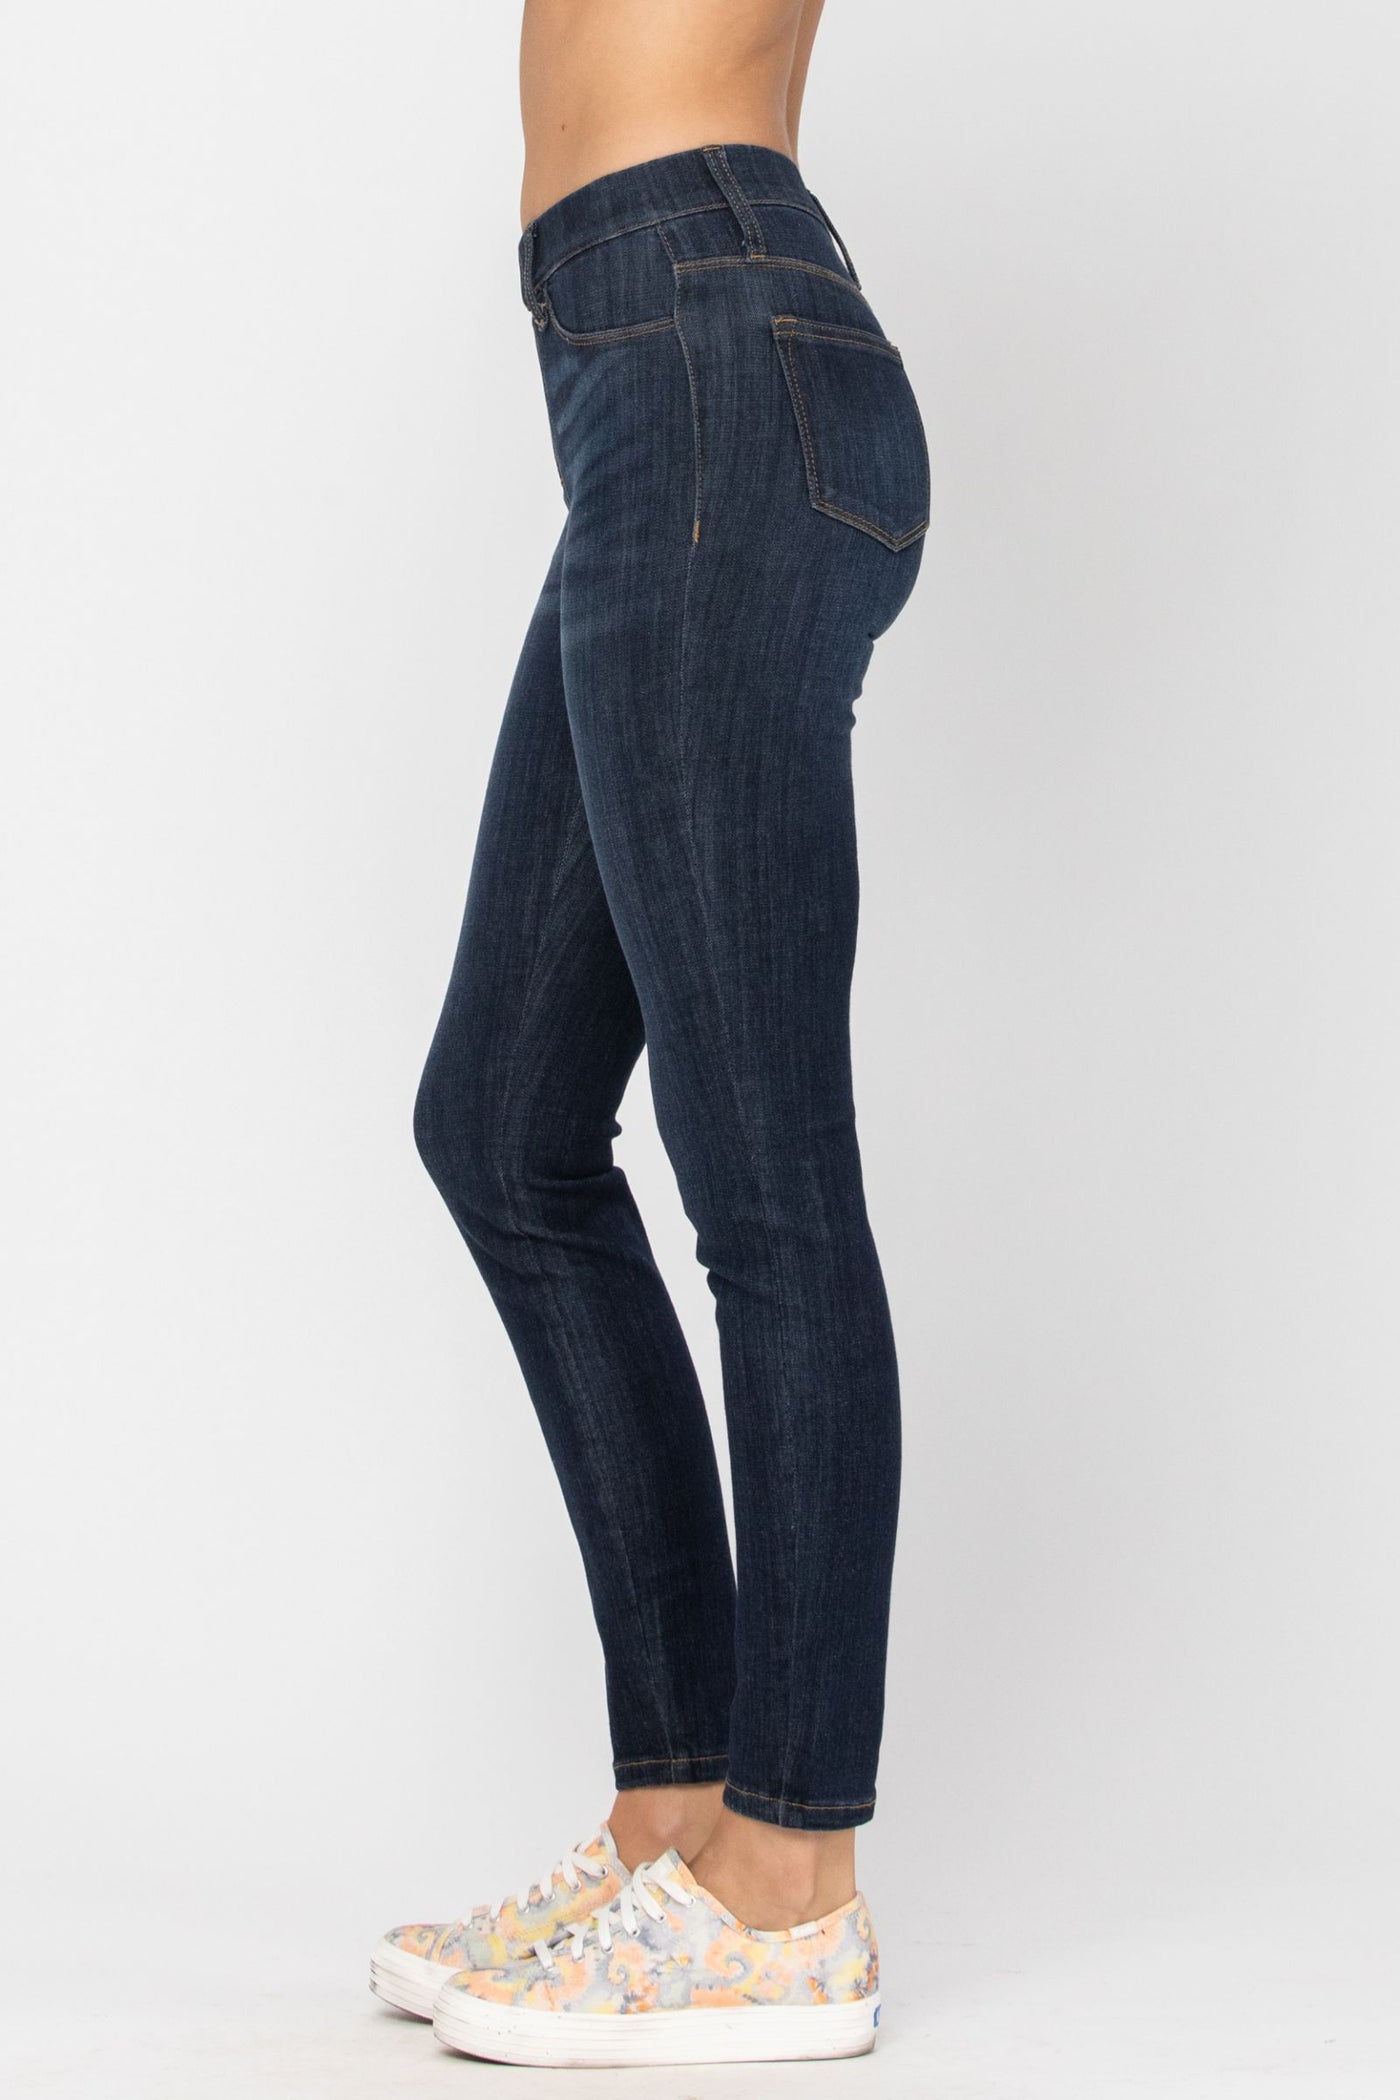 Judy Blue Jeans Mid-Rise Pull On Jegging Skinny